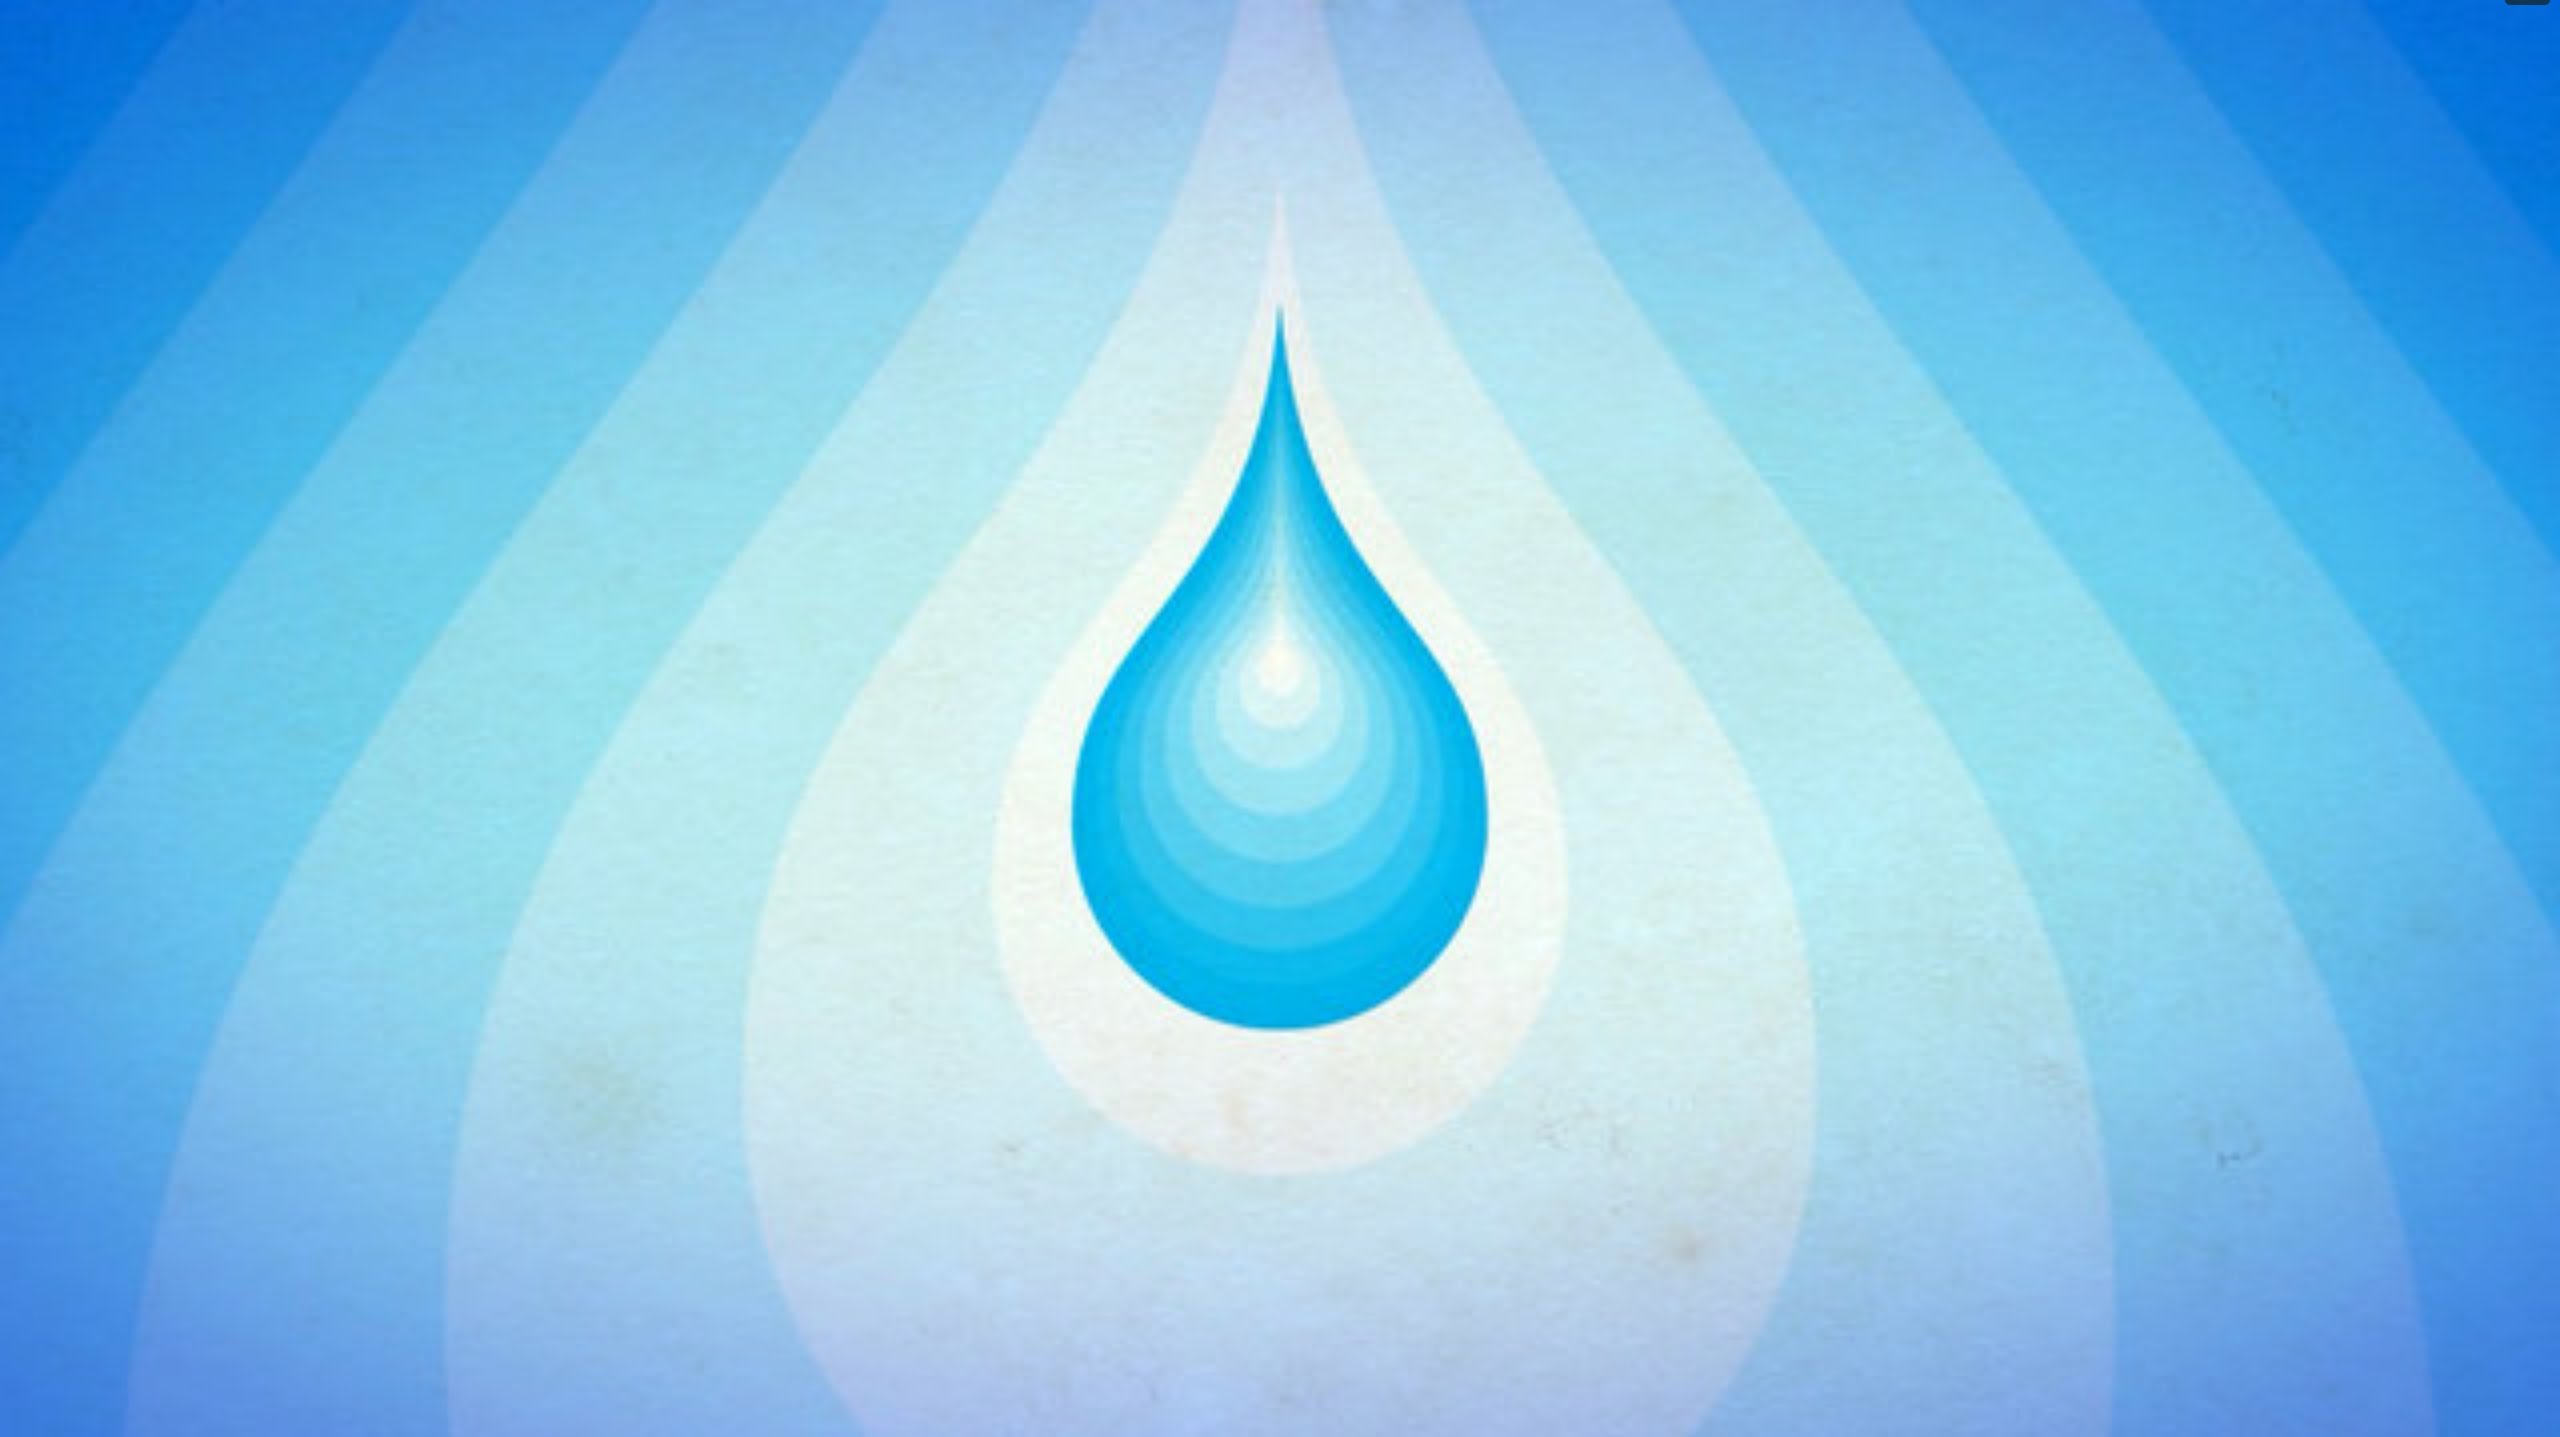 World Water Day - Helping Make the Dream of Clean Water for All a ...